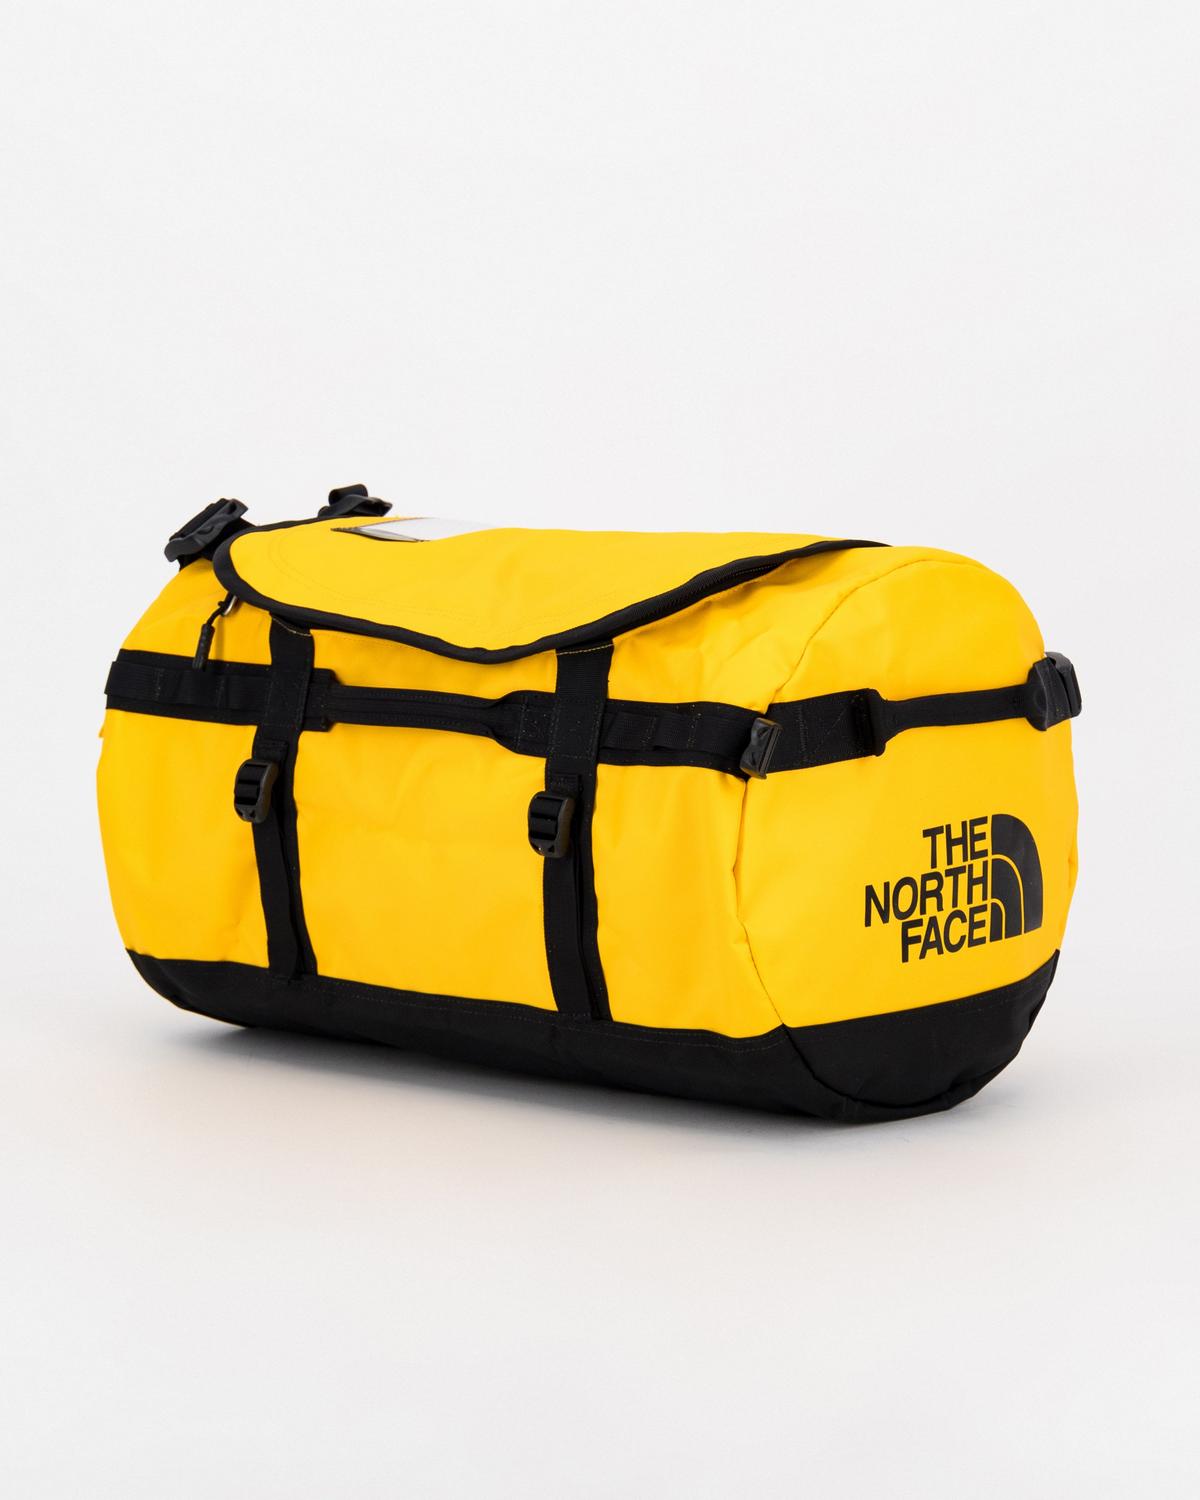 The North Face Small Base Camp Duffel Bag -  Yellow